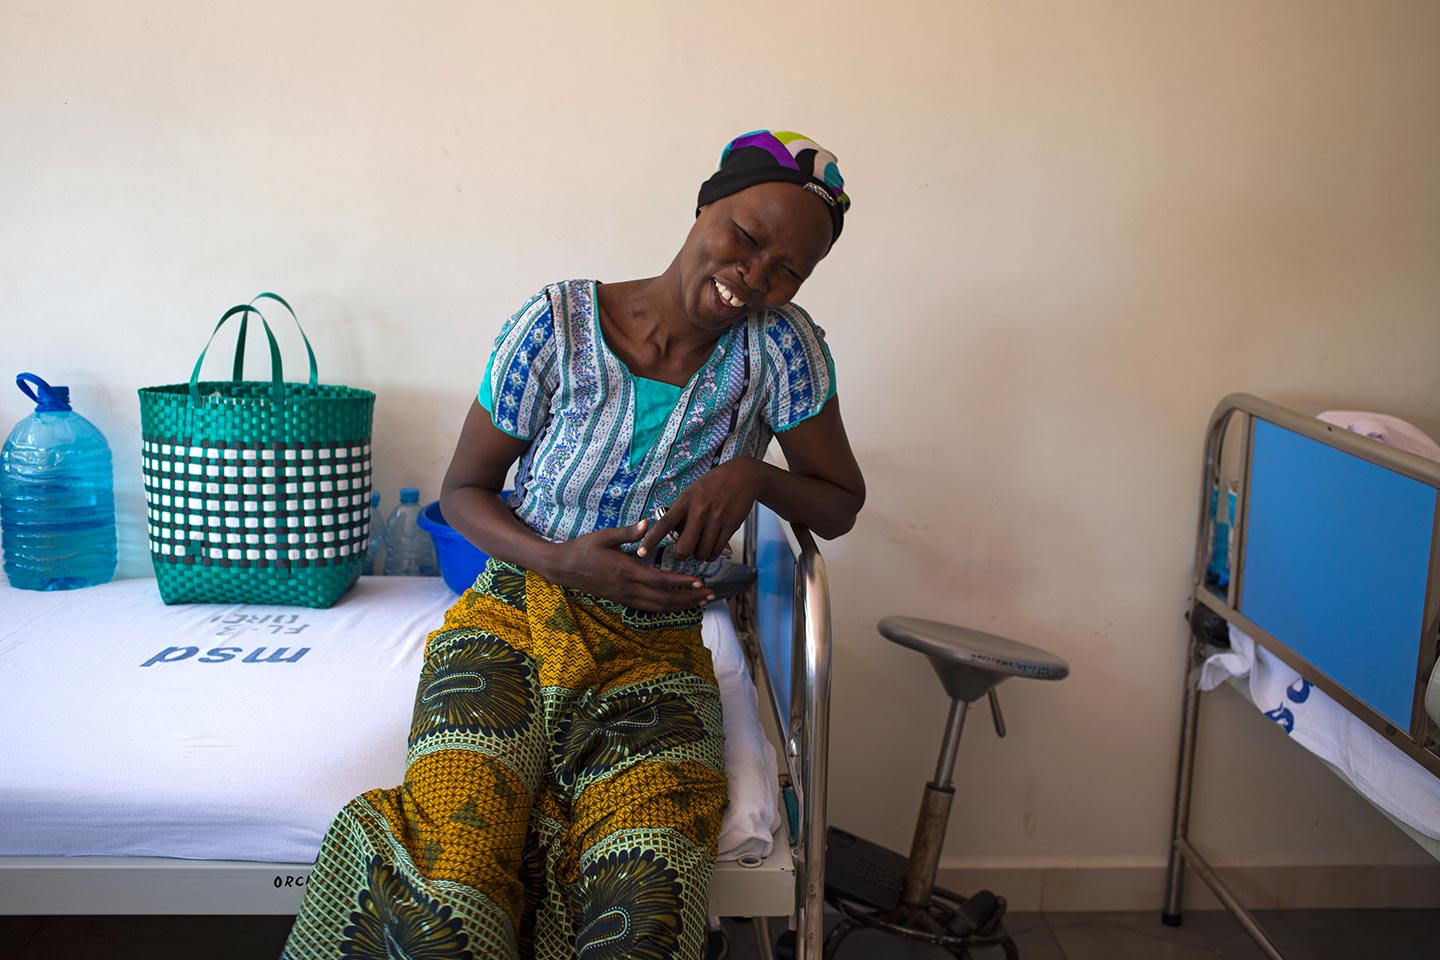 Cervical cancer patient Flora Jacobs poses with her head scarf to cover her hair loss at the Ocean Road Cancer Institute in Dar es Salaam. – Credit: Gavi/2014/Karel Prinsloo